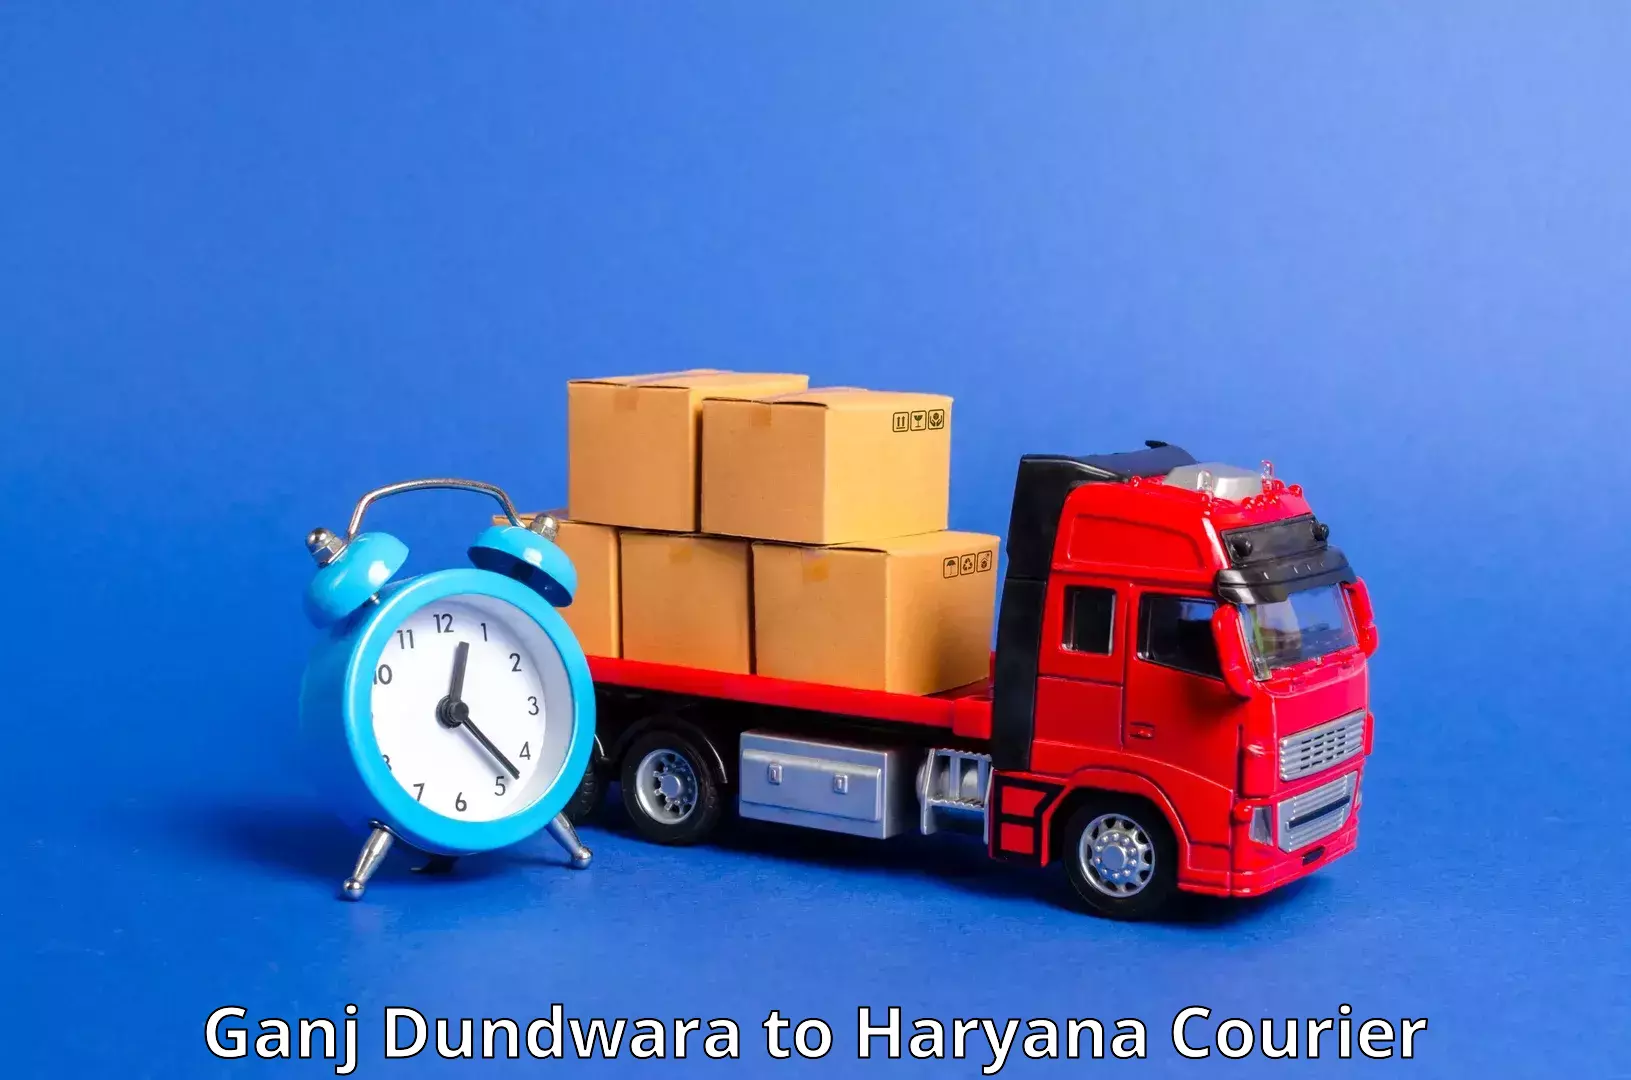 Dynamic courier operations in Ganj Dundwara to Faridabad